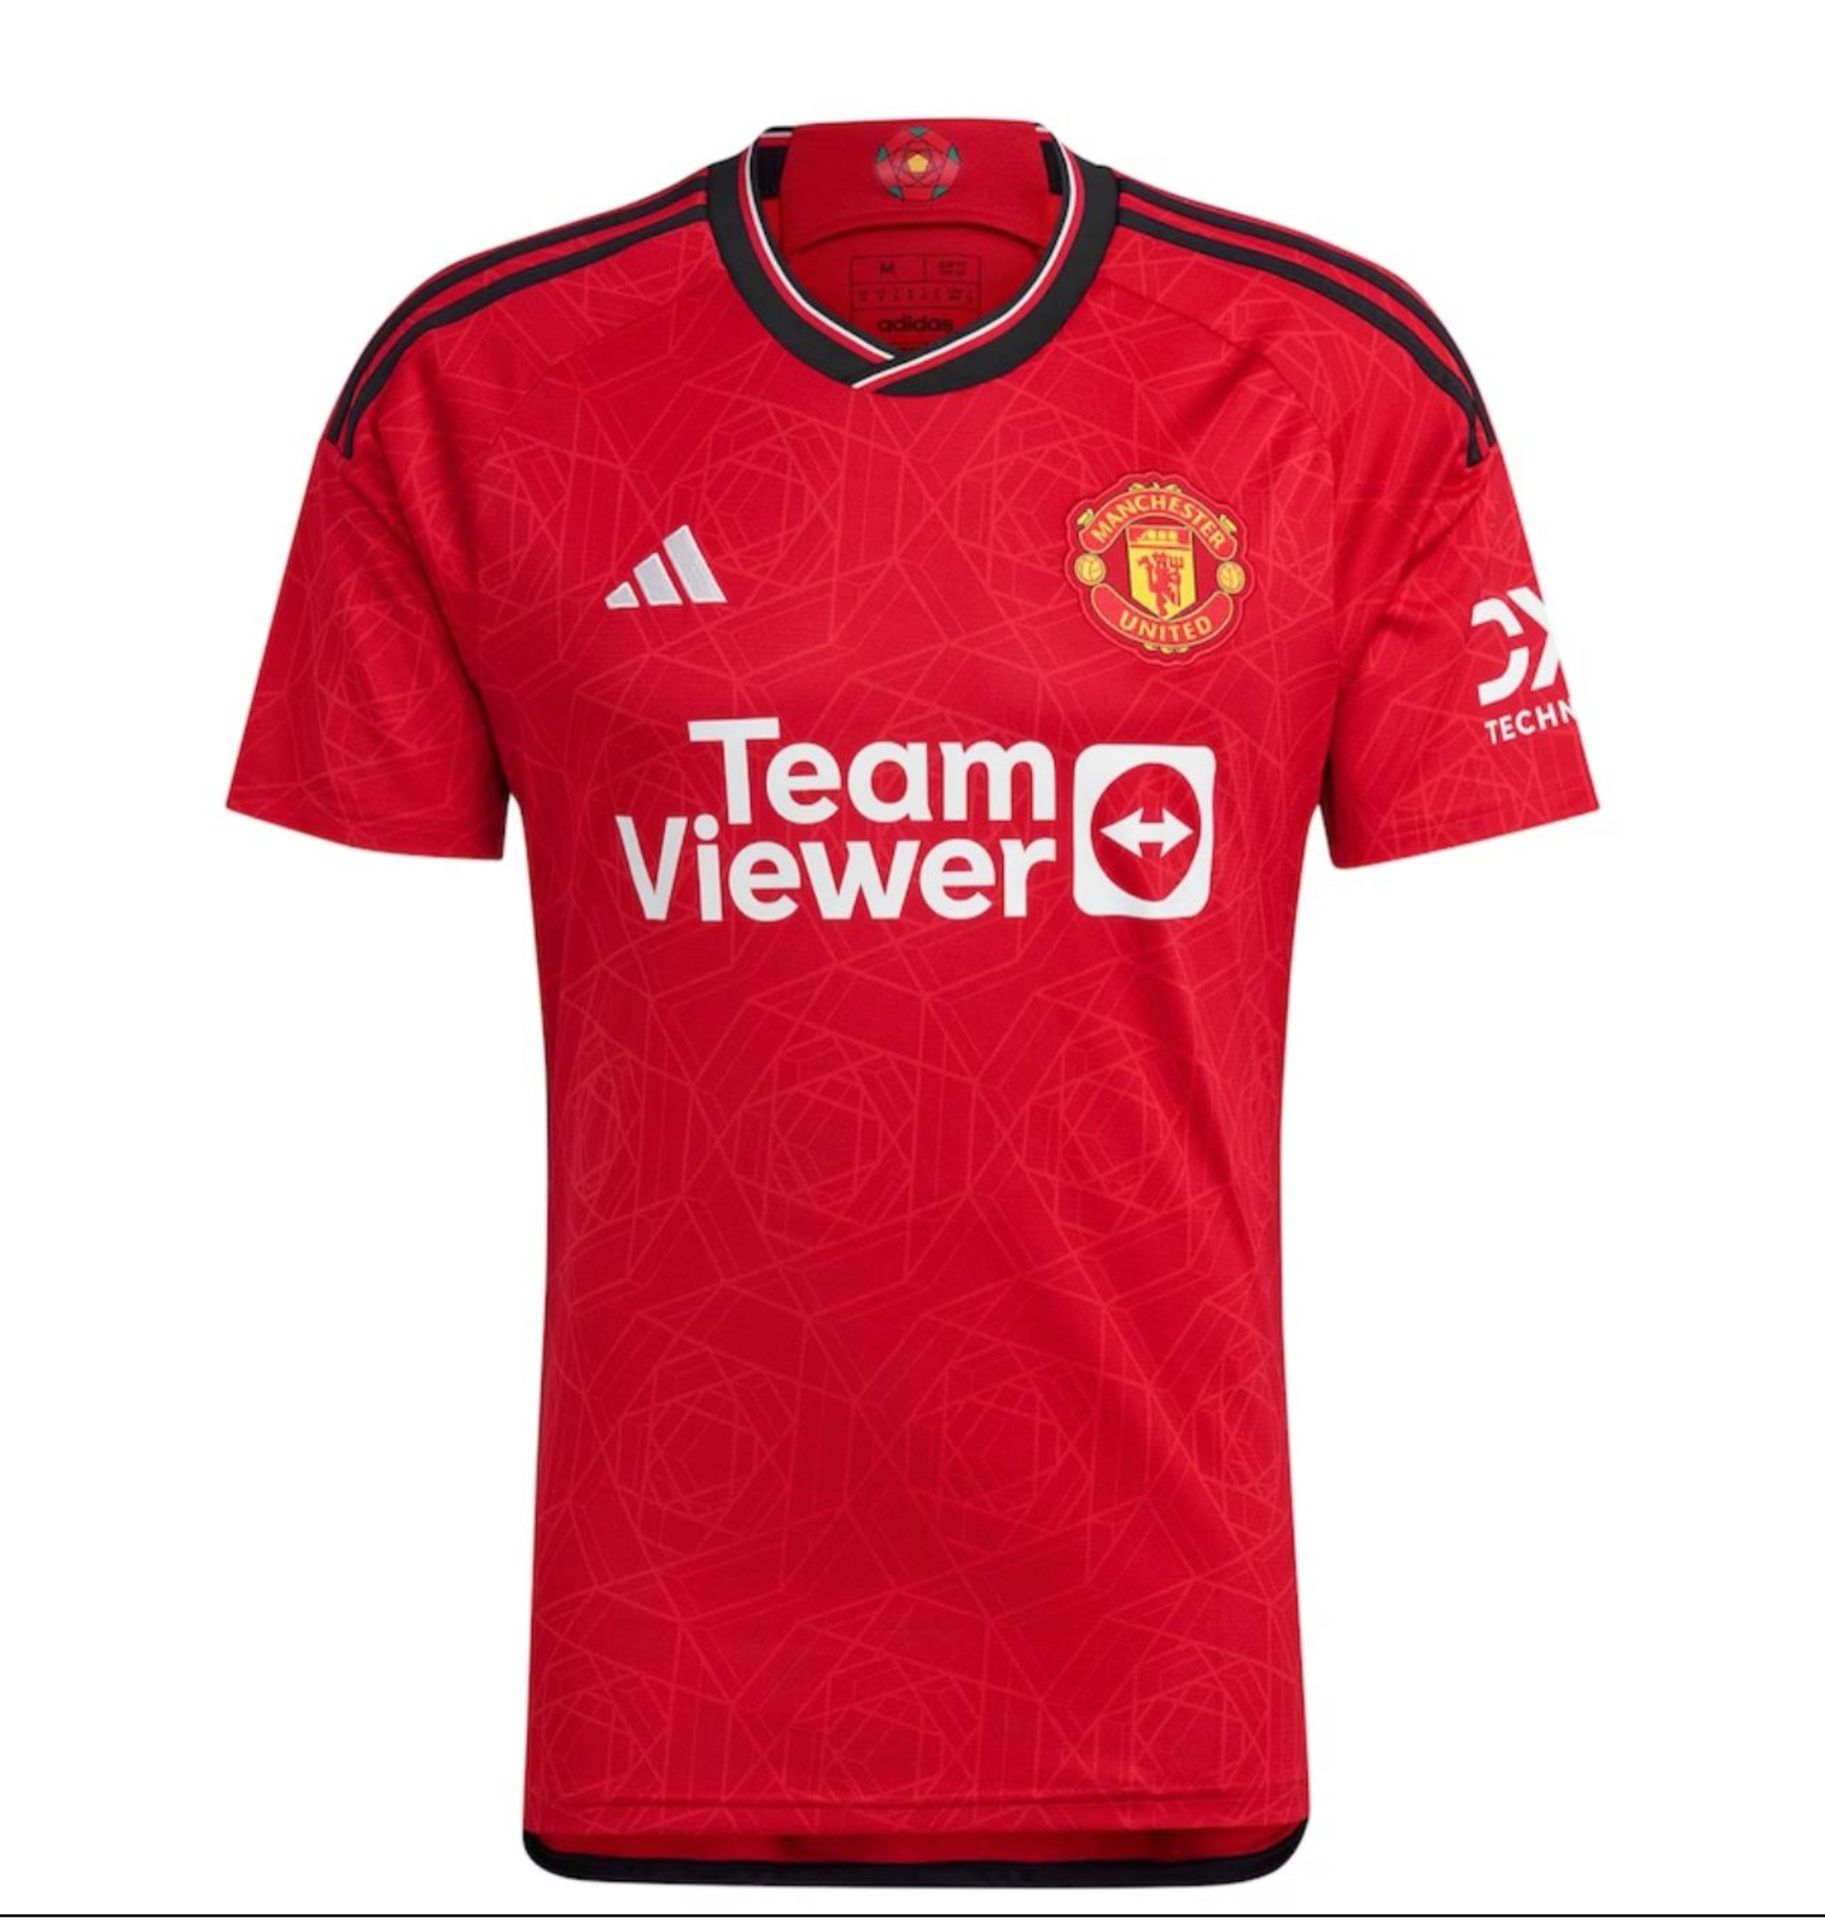 Mix man United Style 23/24 home, away, and third shirts - Image 6 of 6